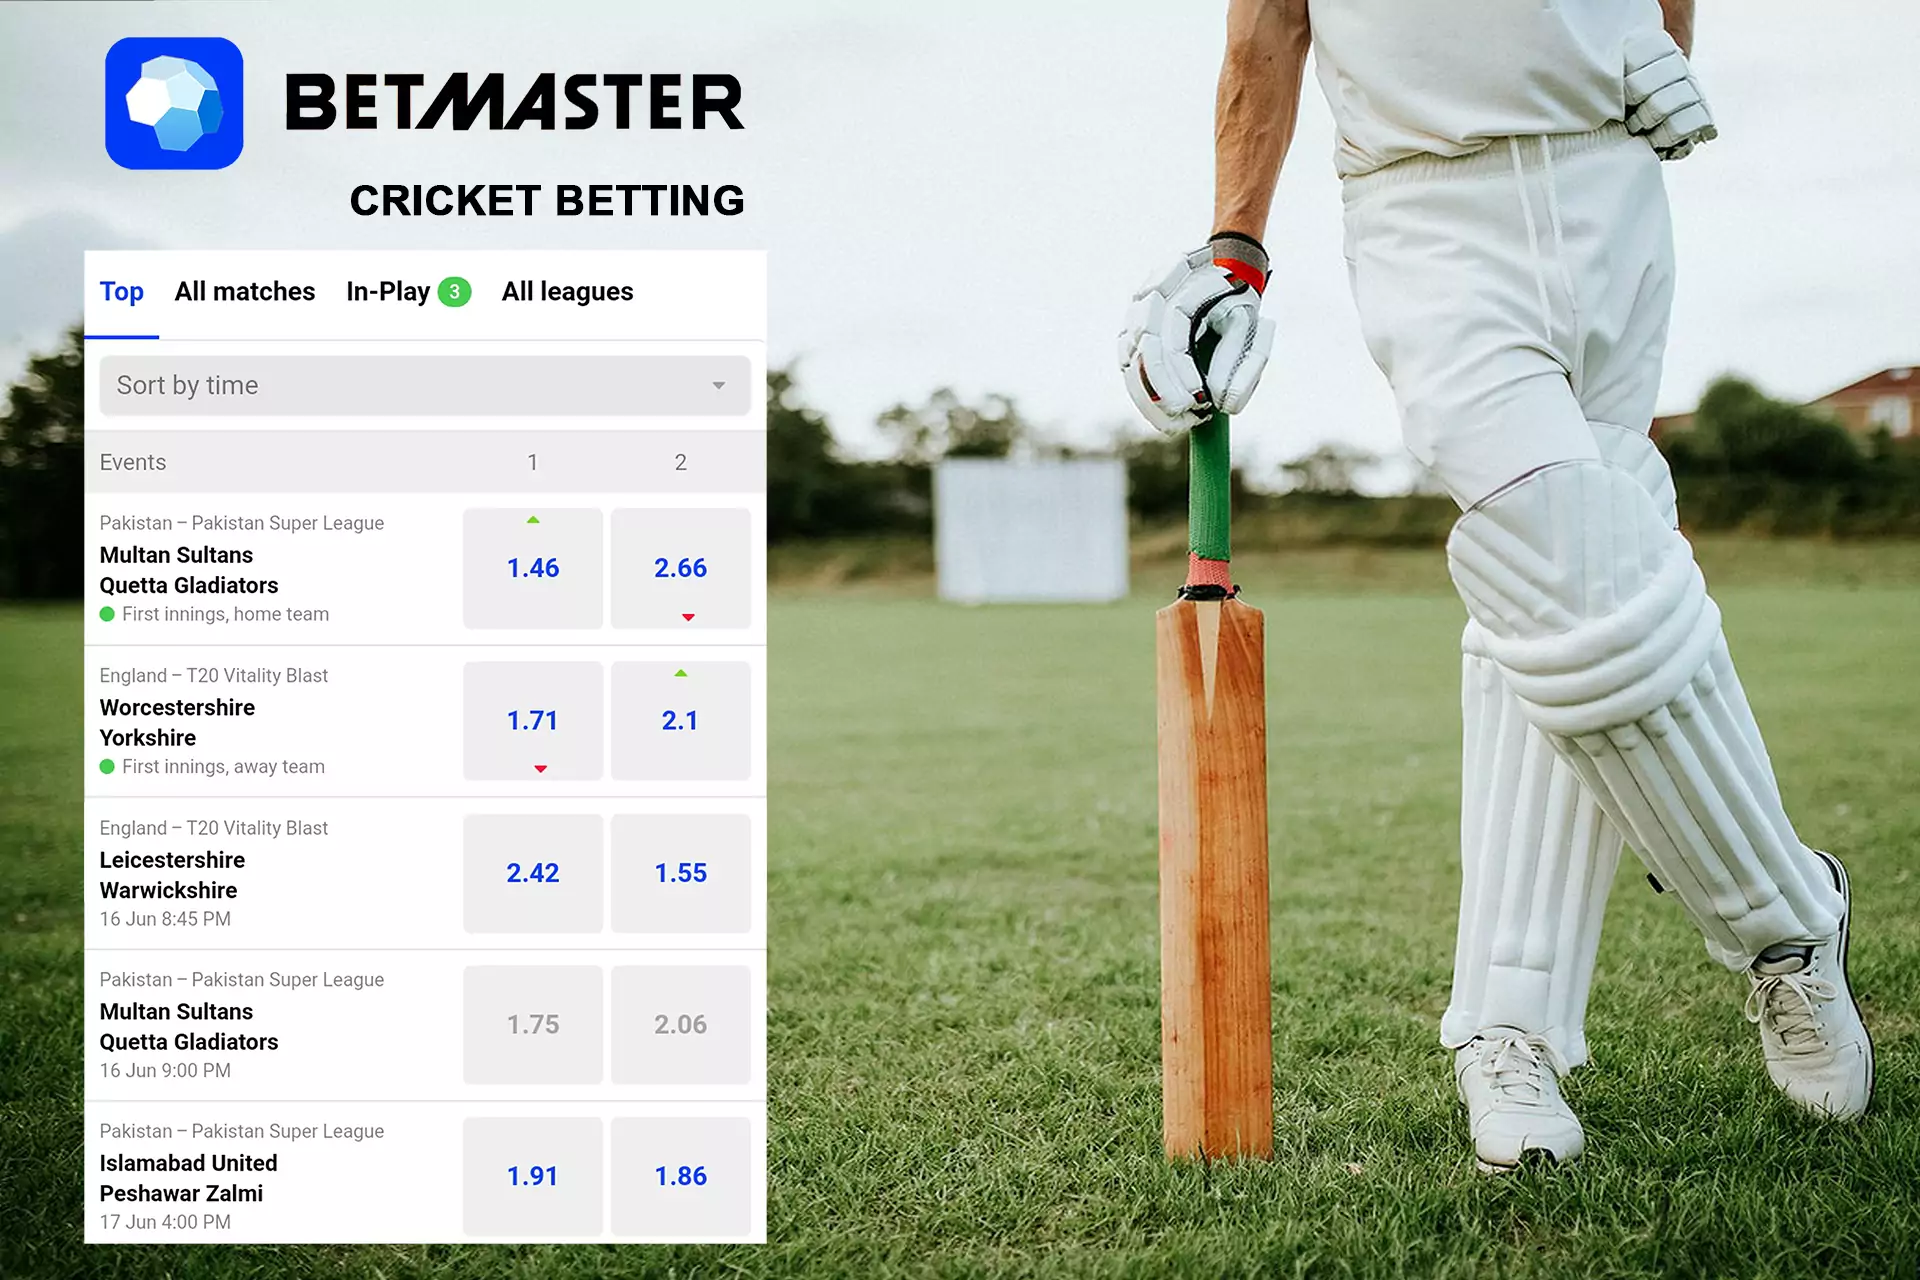 Place bets on favorite cricket team on Betmaster.